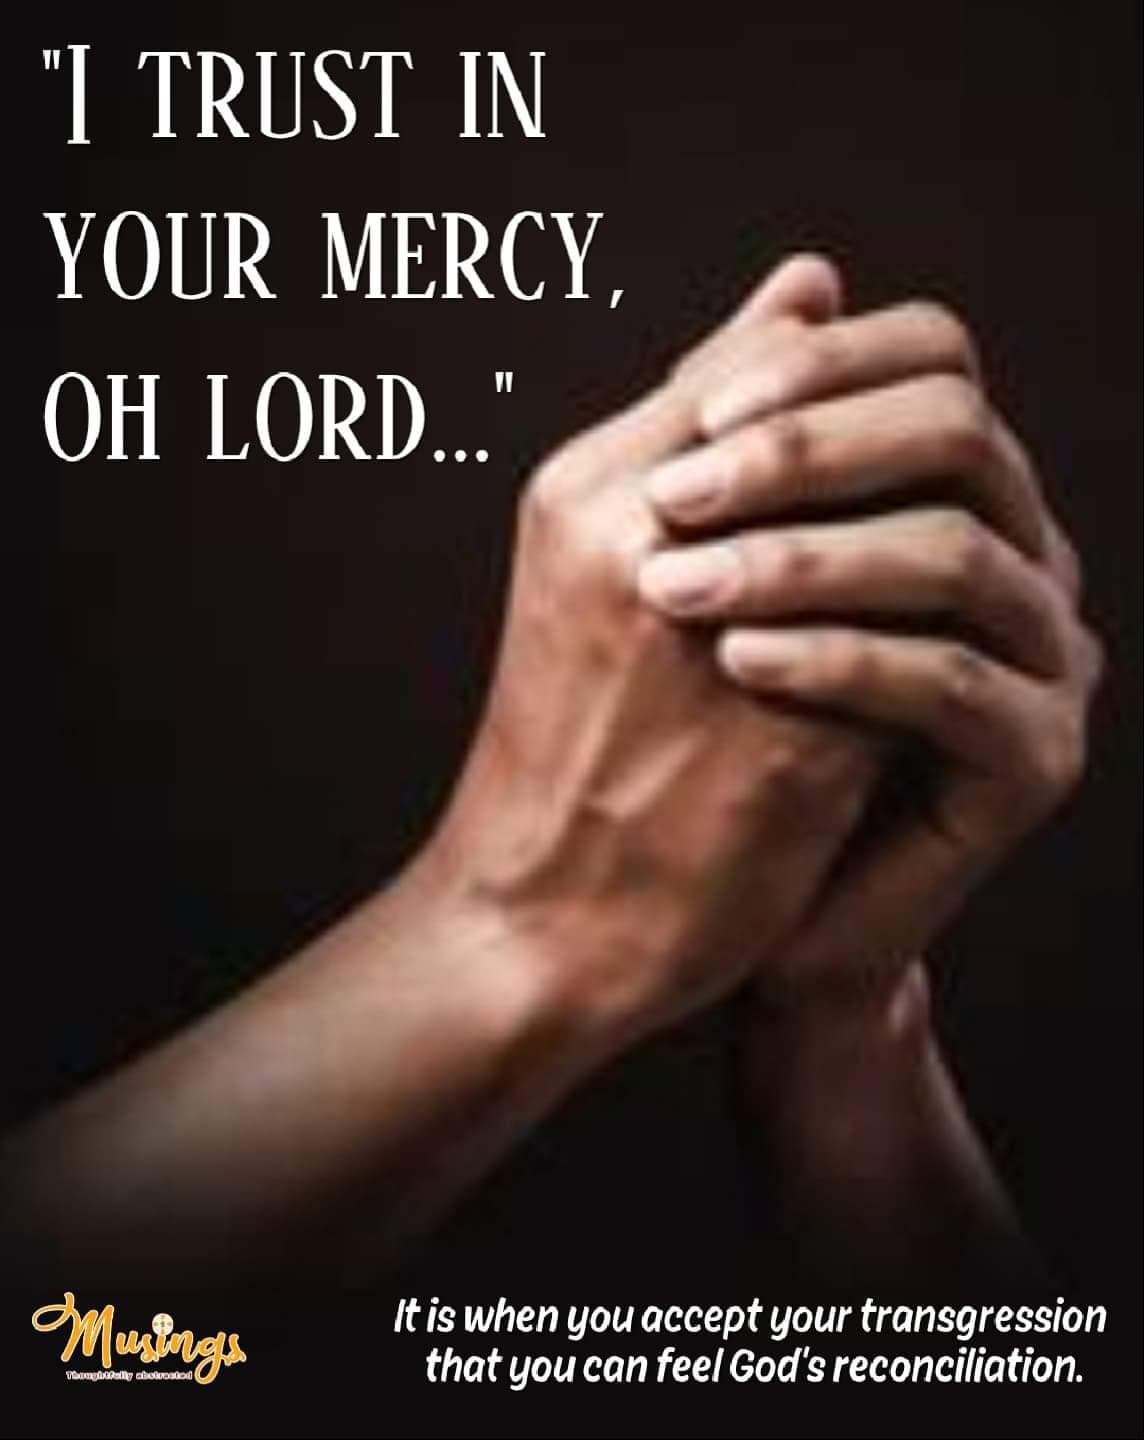 I TRUST IN YOUR MERCY, OH LORD